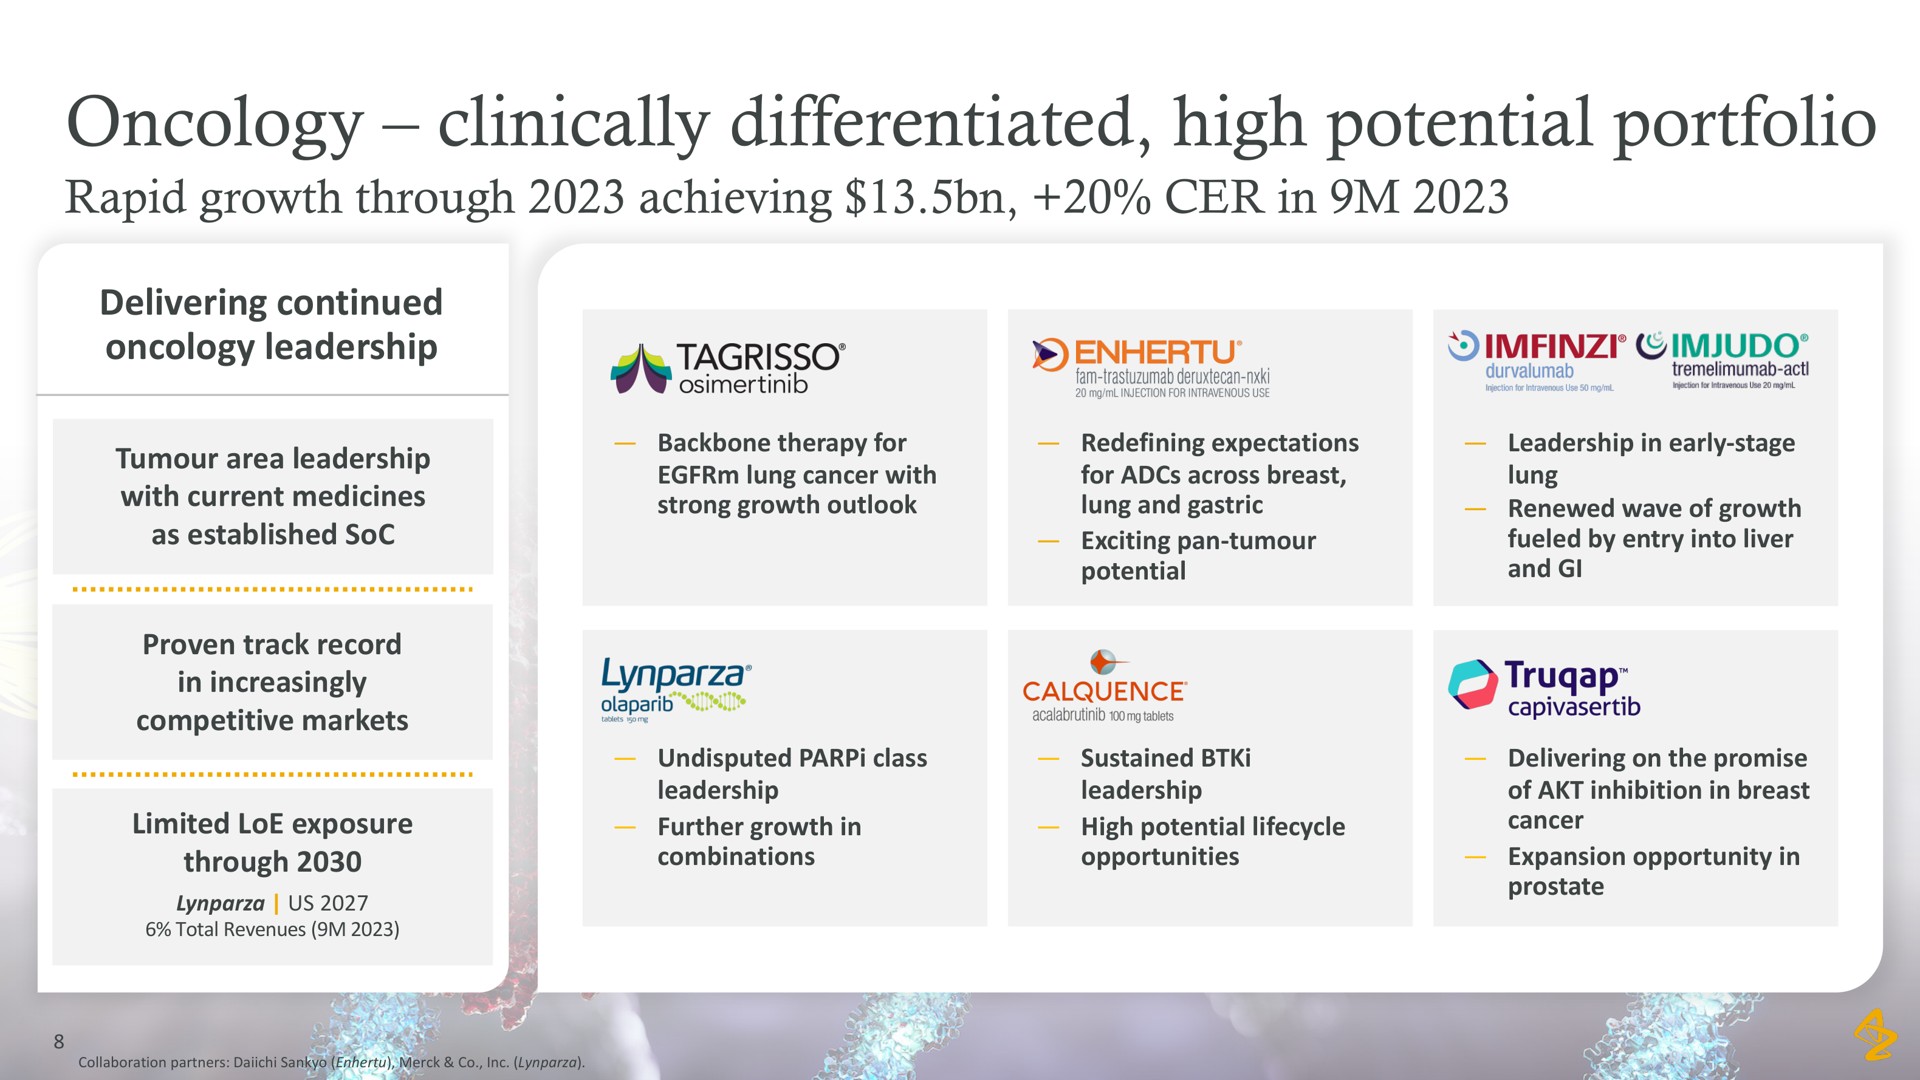 oncology clinically differentiated high potential portfolio | AstraZeneca